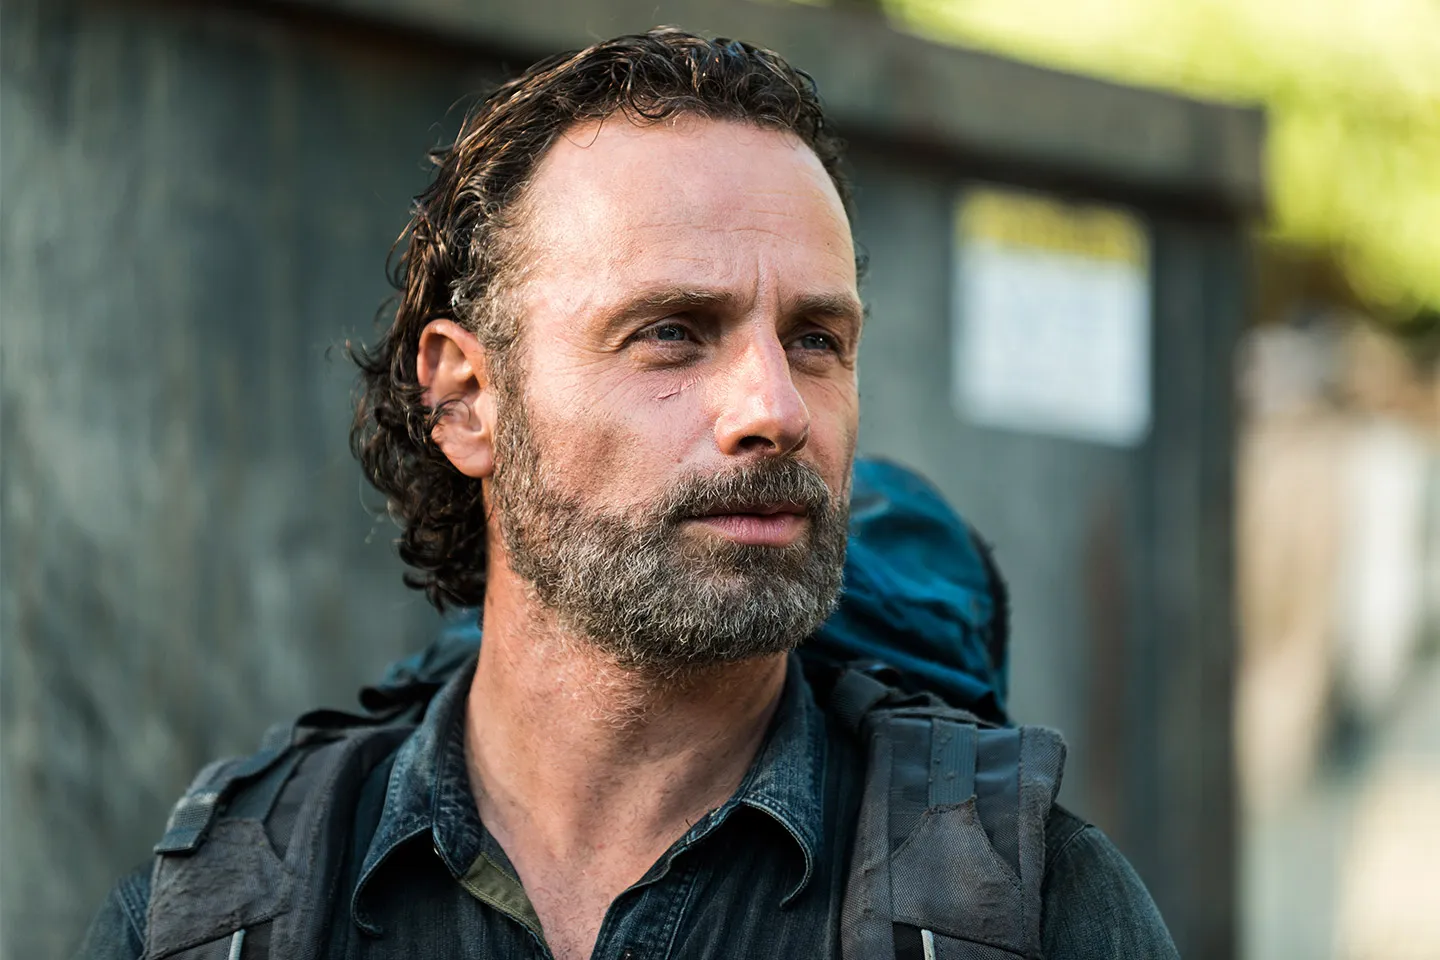 Ex-sheriff Rick Grimes as the main lead of the show, The Walking Dead, for seasons 1-9 (Credits: Vanity Fair)